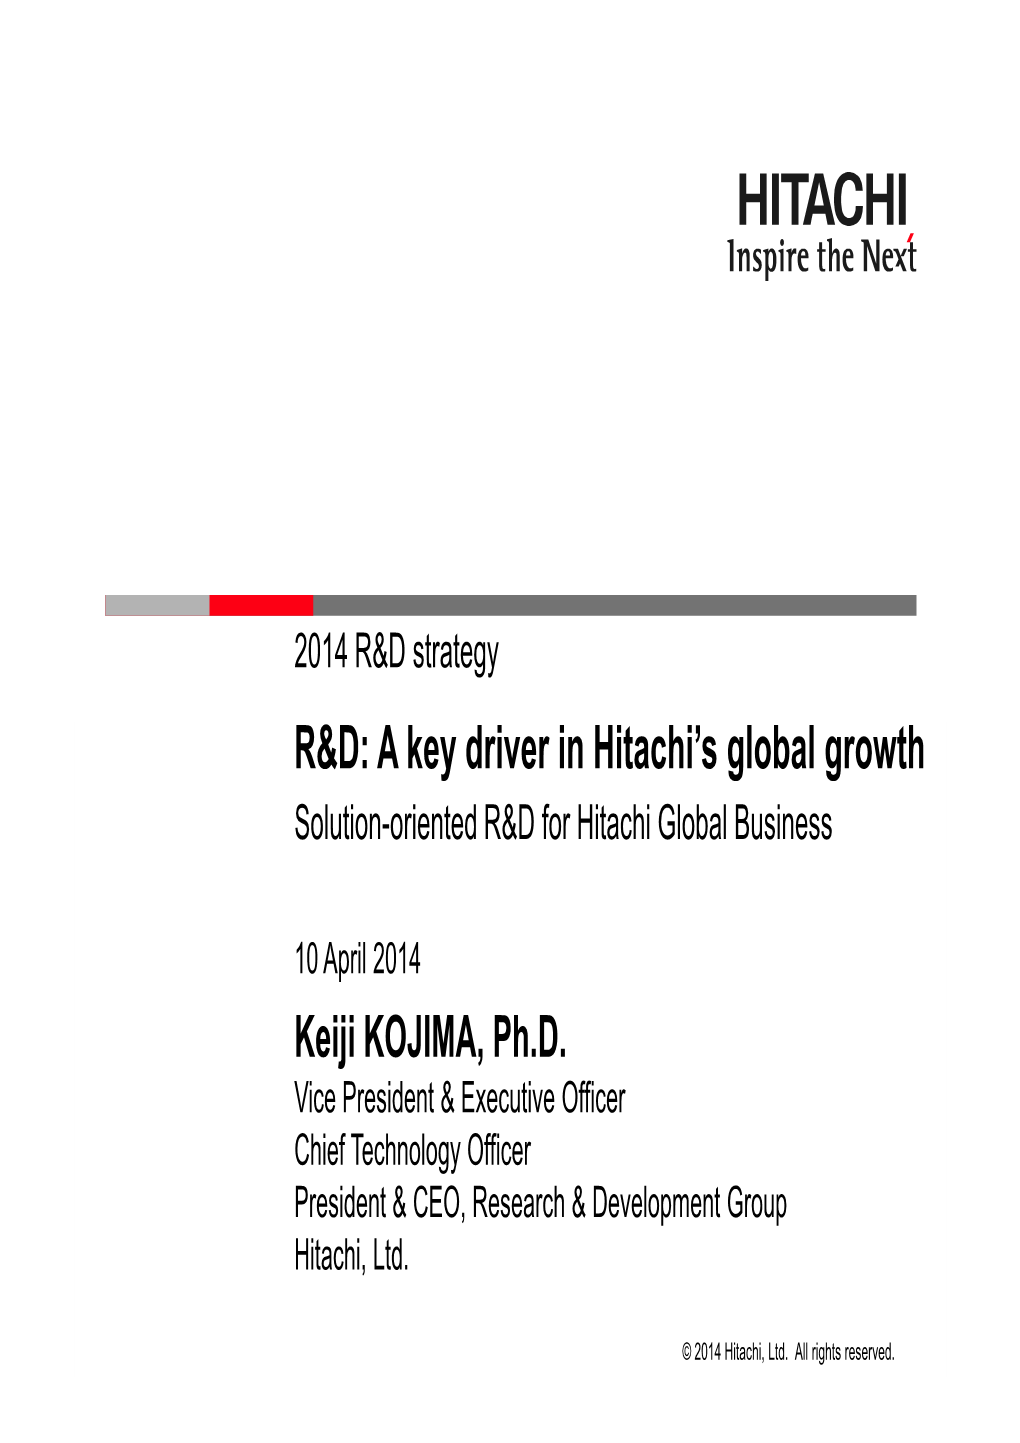 R&D: a Key Driver in Hitachi's Global Growth